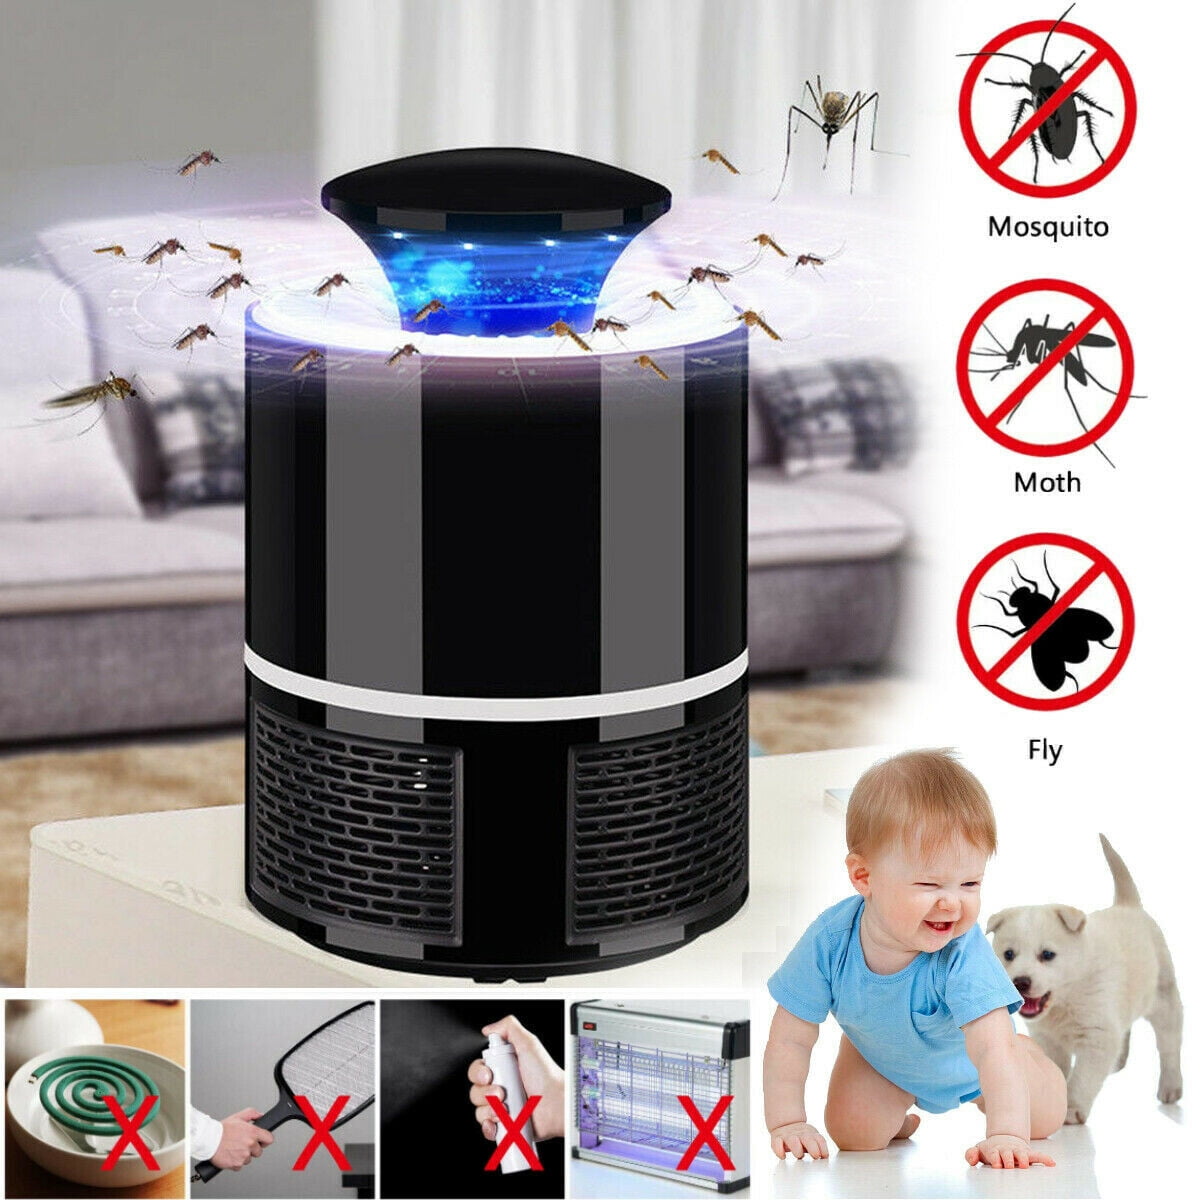 Electric Mosquito Insect Killer/mosquito trap/Bug Zapper with 360 Degrees LED Trap Lamp,Strong Built in Suction Fan,USB Power Supply,Chemical-free and Quite for Infants,Pregnant,Children Black 